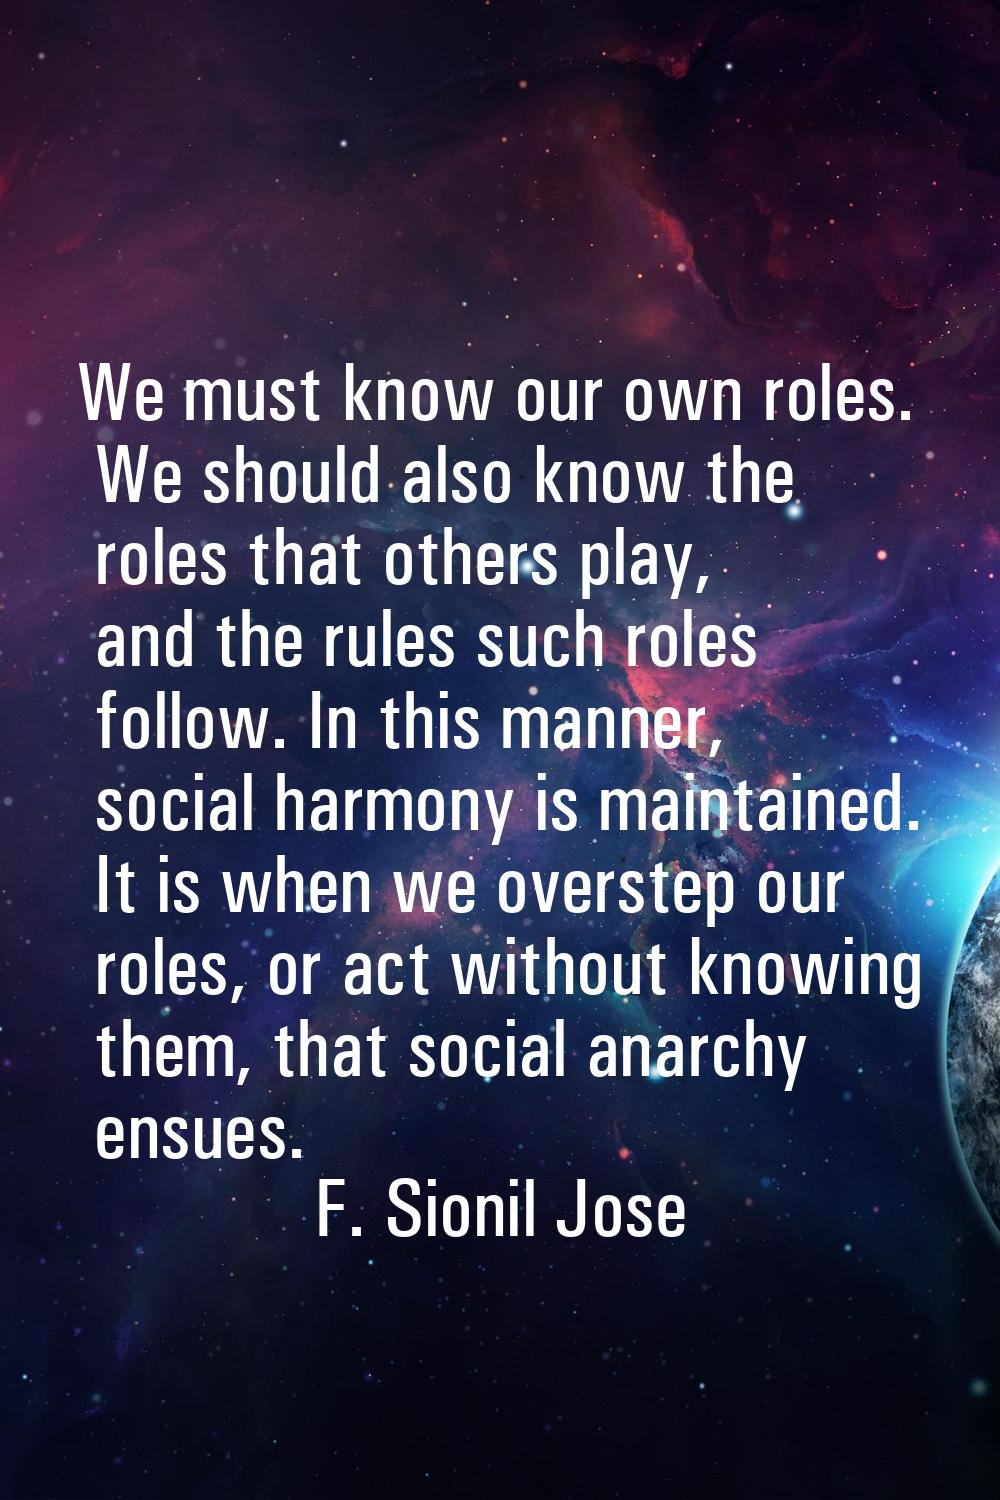 We must know our own roles. We should also know the roles that others play, and the rules such role